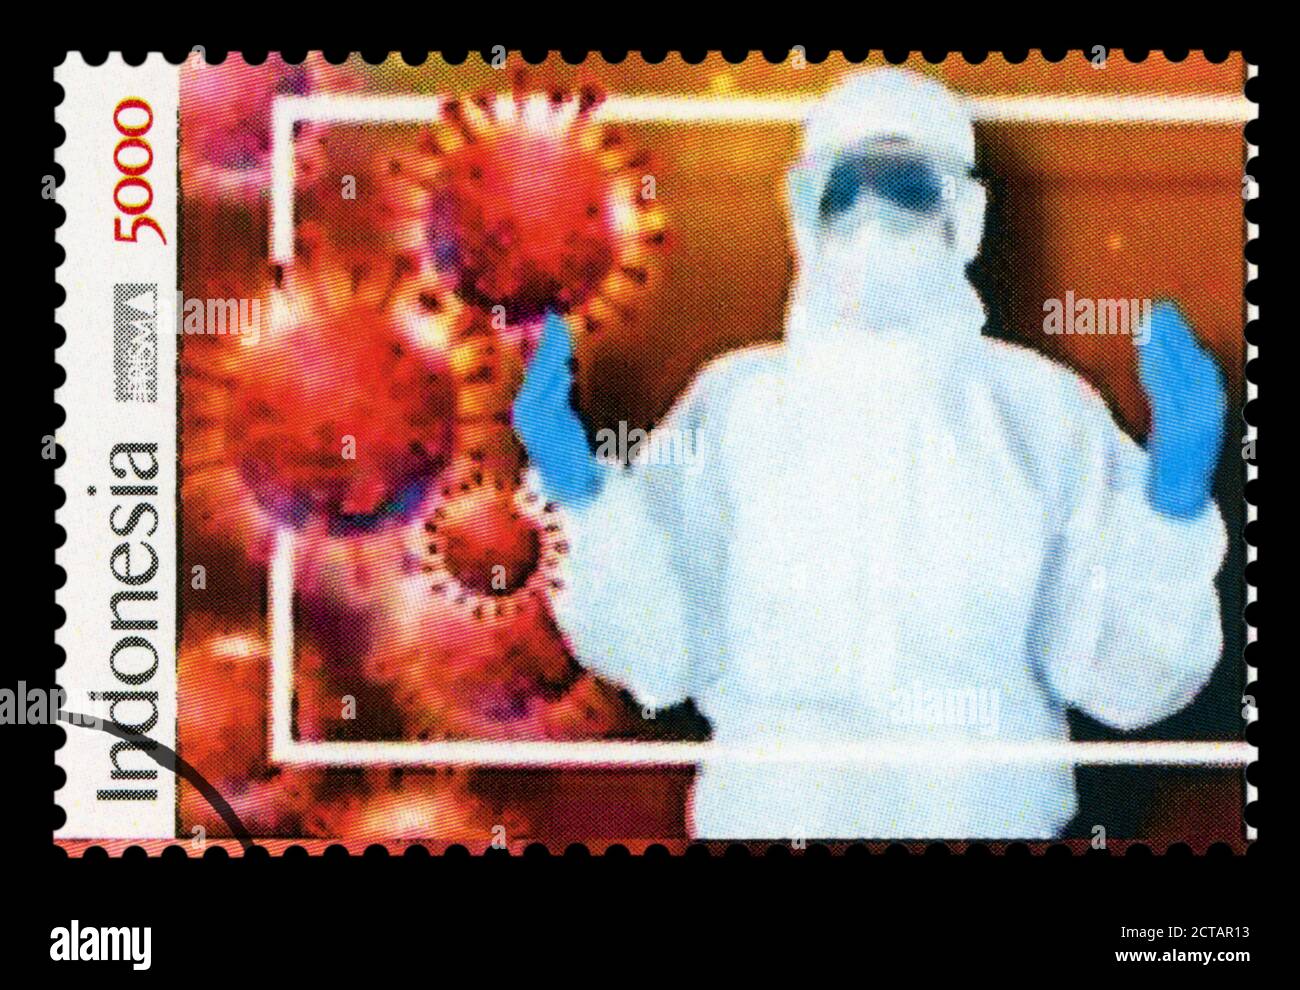 INDONESIA – CIRCA, APRIL 2020: A postage stamp printed in Indonesia showing an image of medical workforce agains pandemic of COvid-19, circa April 202 Stock Photo